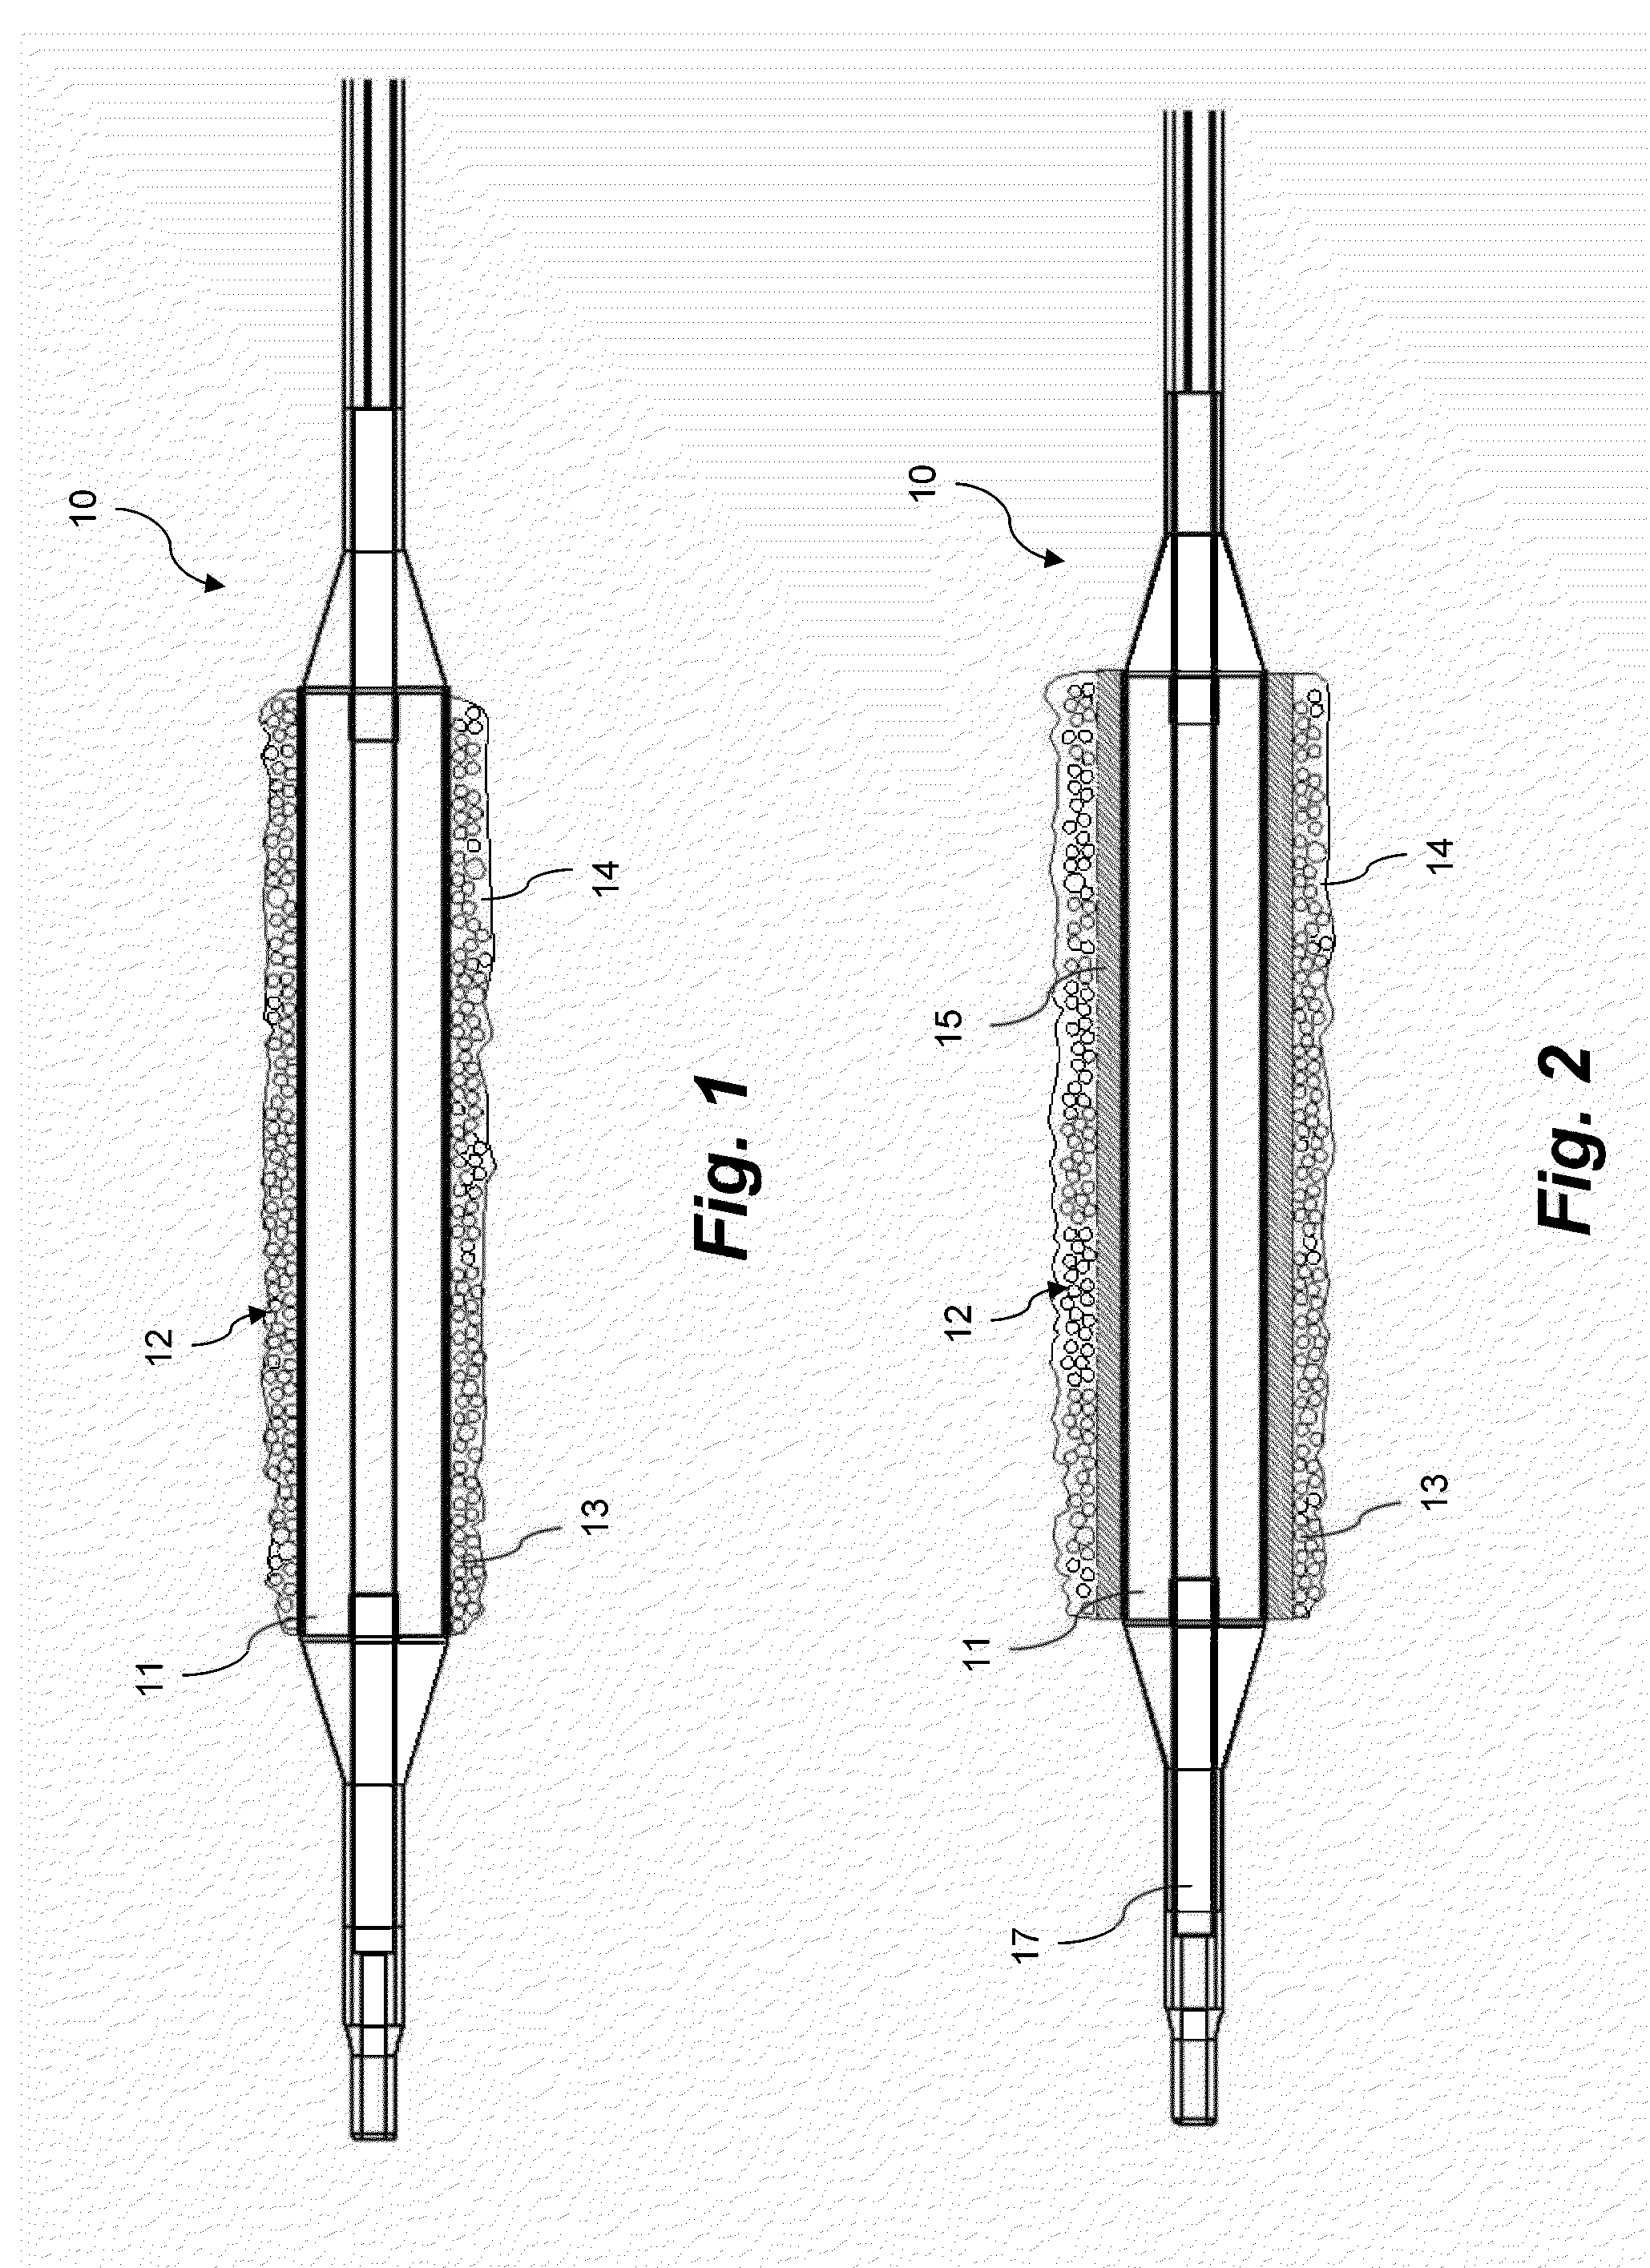 Coating for intraluminal expandable catheter providing contact transfer of drug micro-reservoirs